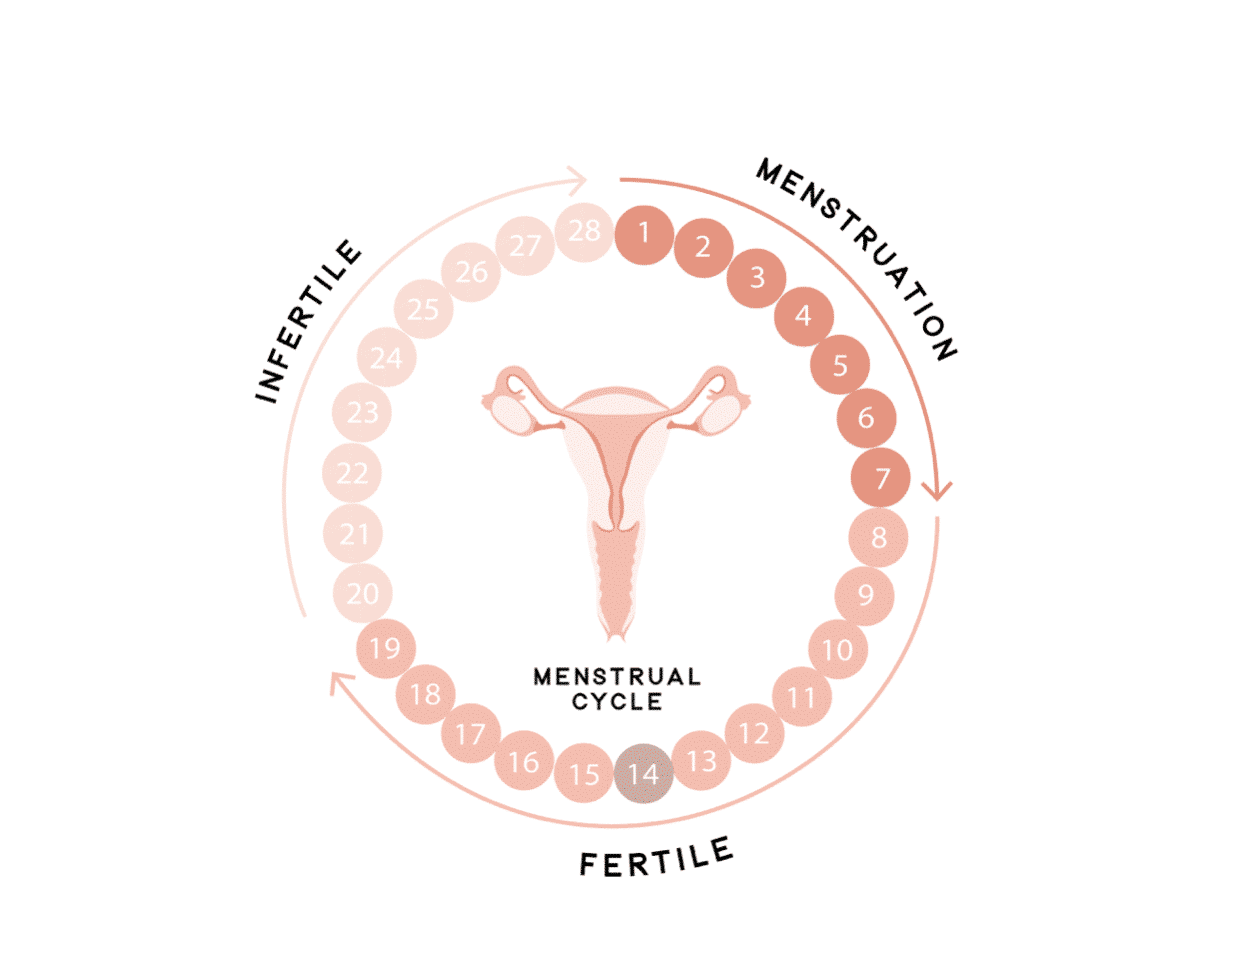 Cervical mucus is the fluid produced by your cervix during your